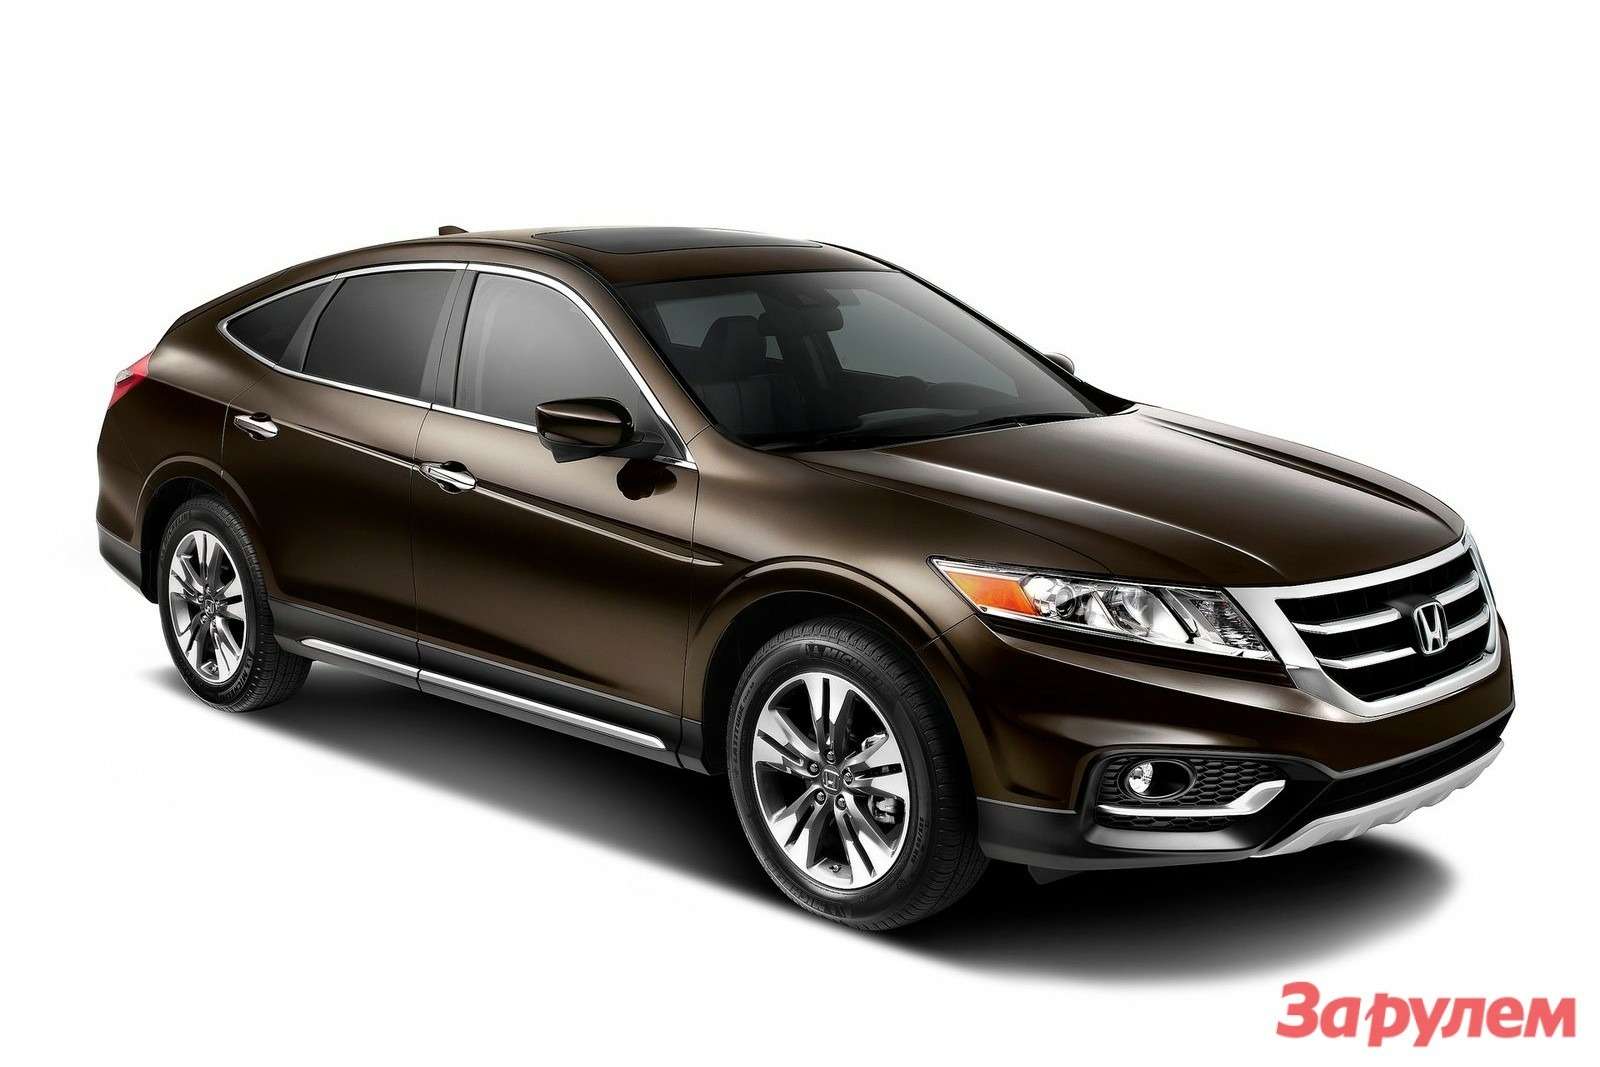 2013 MY Honda Crosstour side-front view